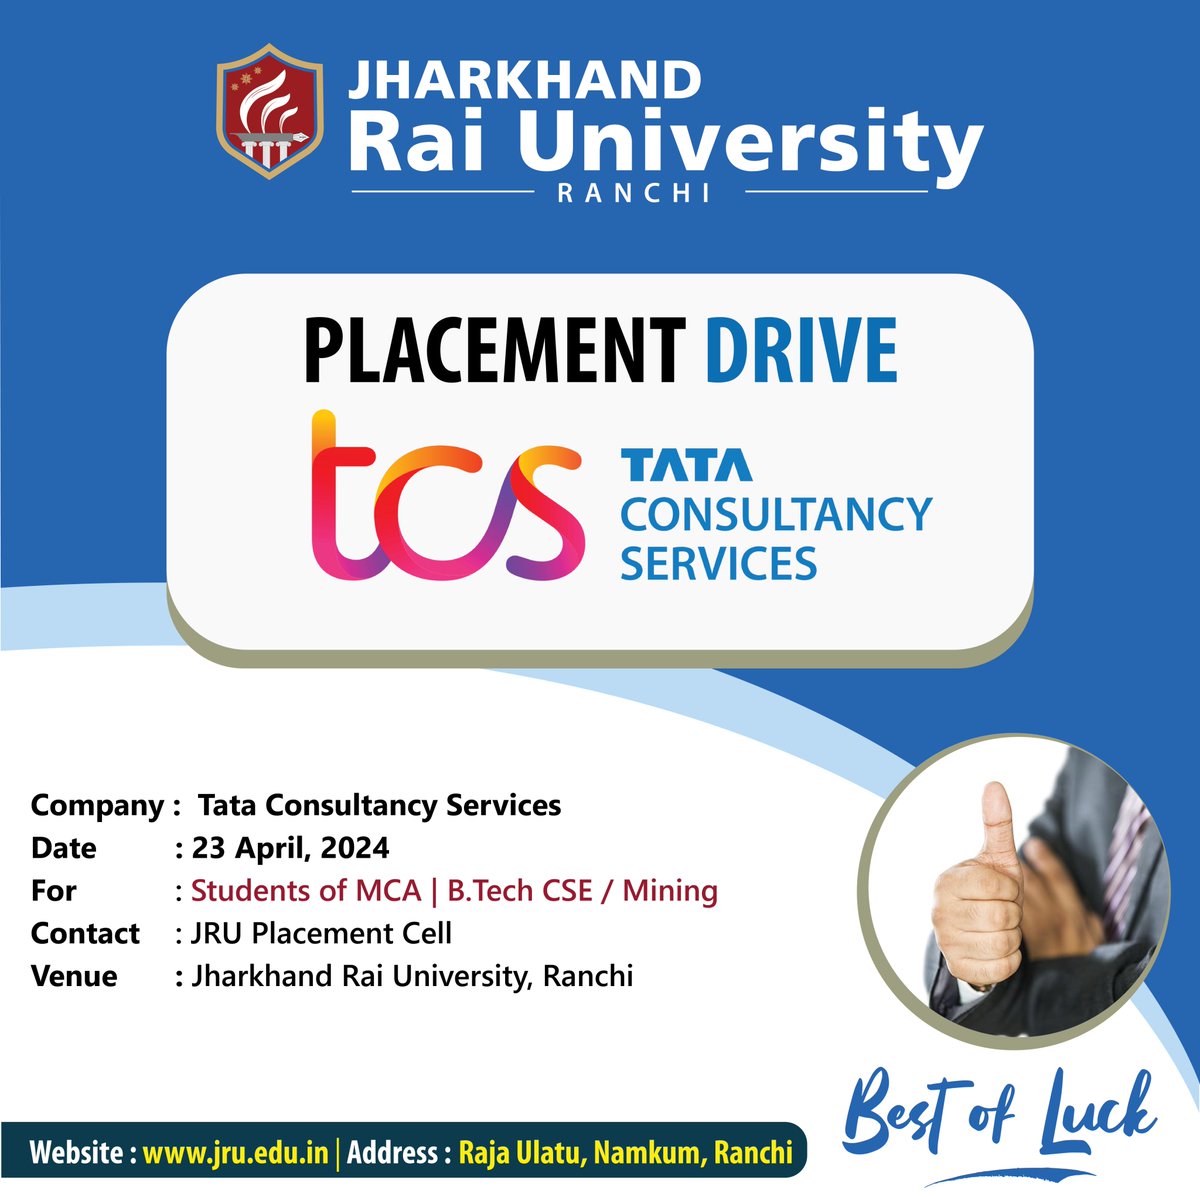 On Campus Placement Drive @TCS 
Best of Luck Students. May you all shine and succeed!
#Placementdrive #TataConsultancyServices